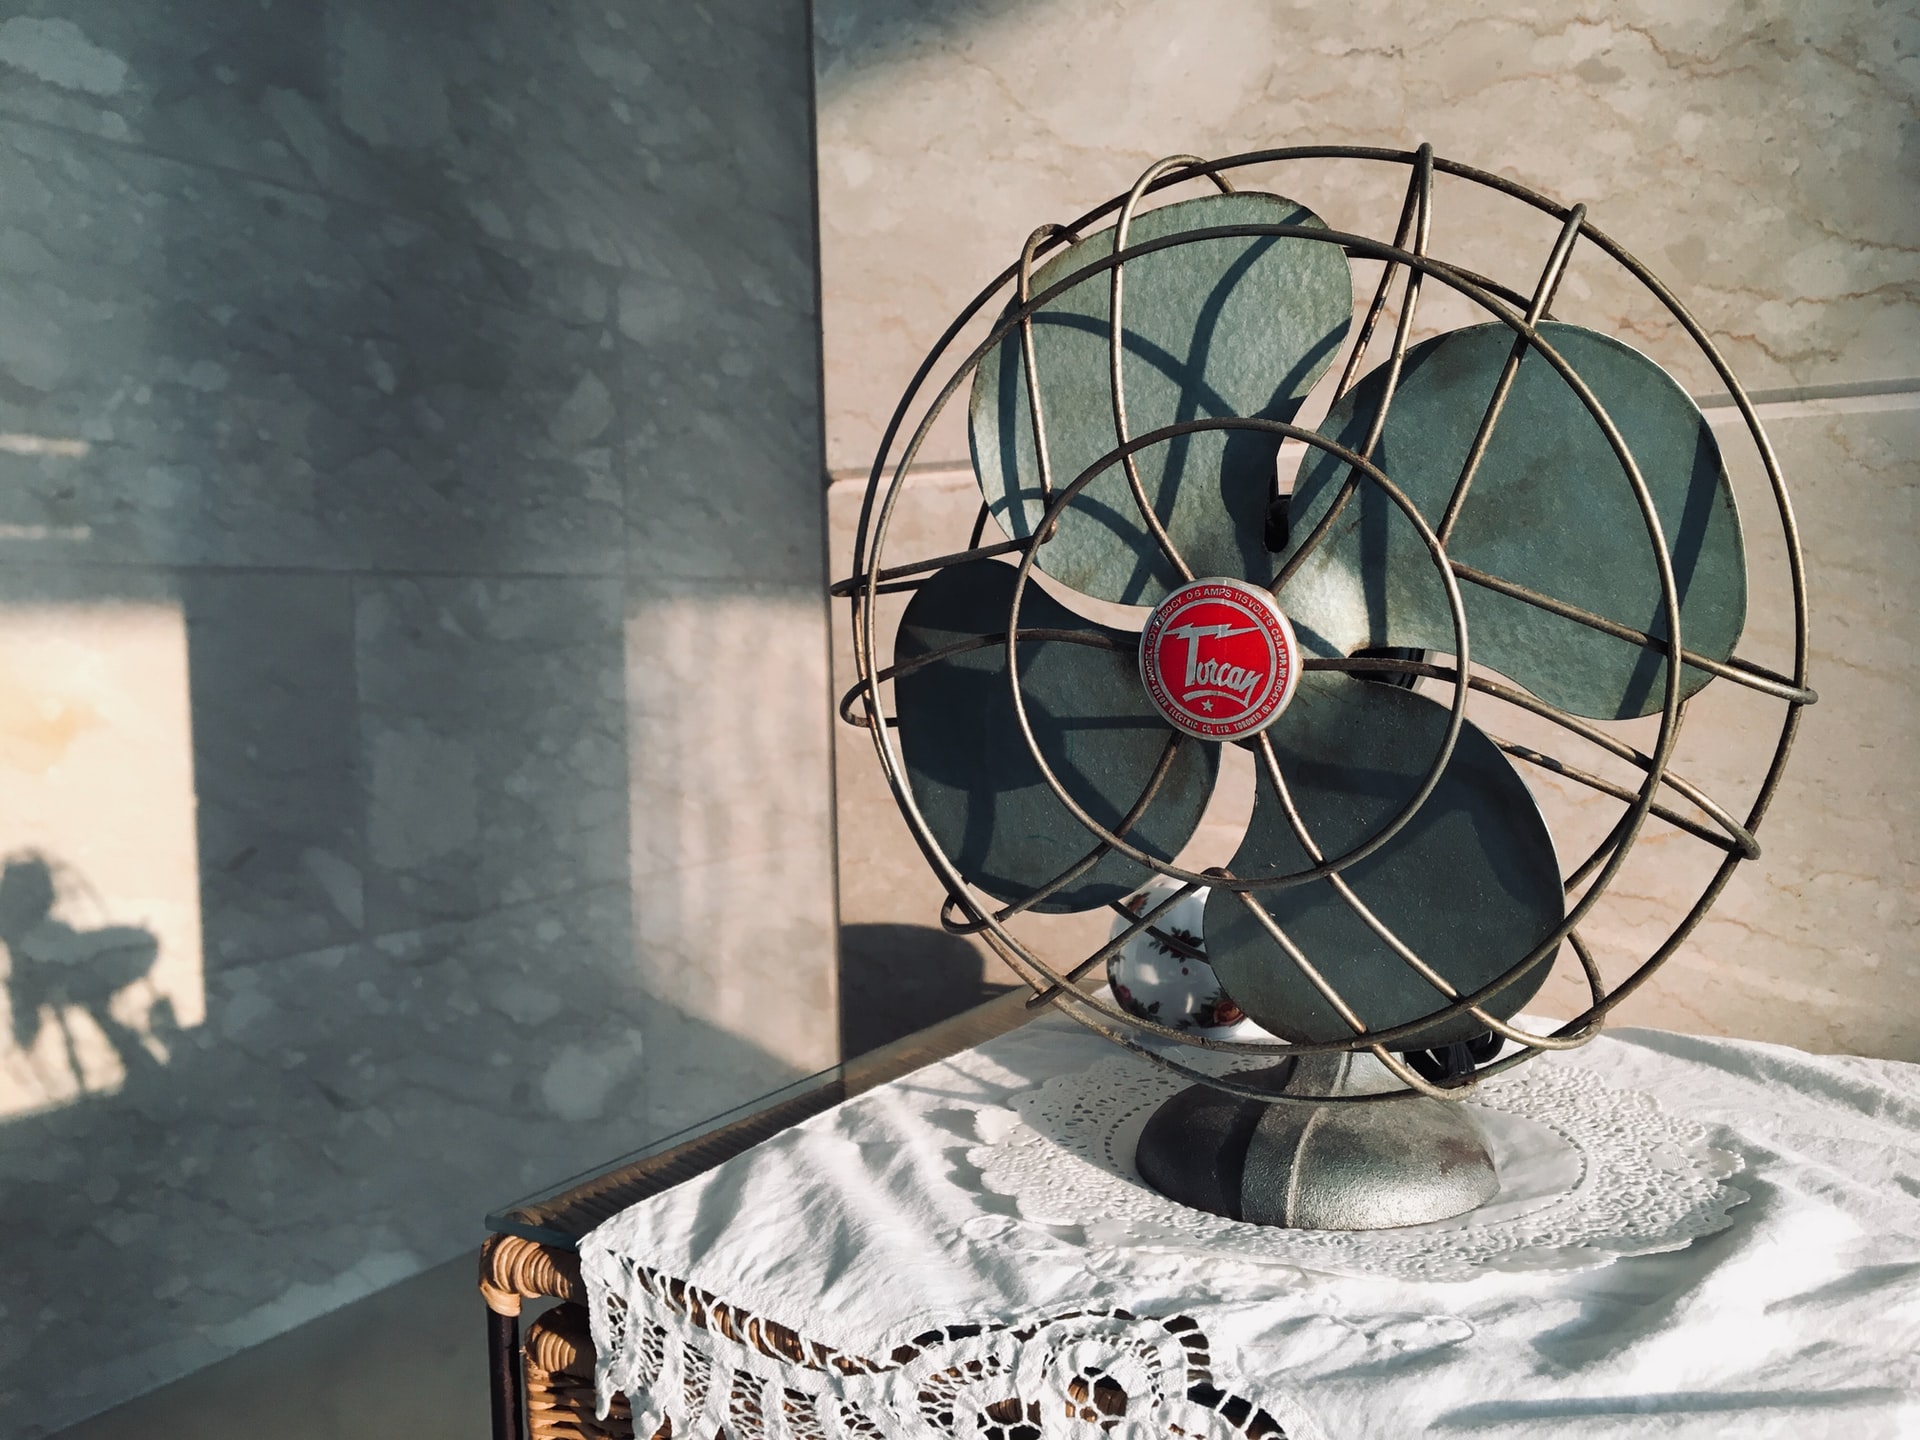 Portable fan. Which will work well at home?